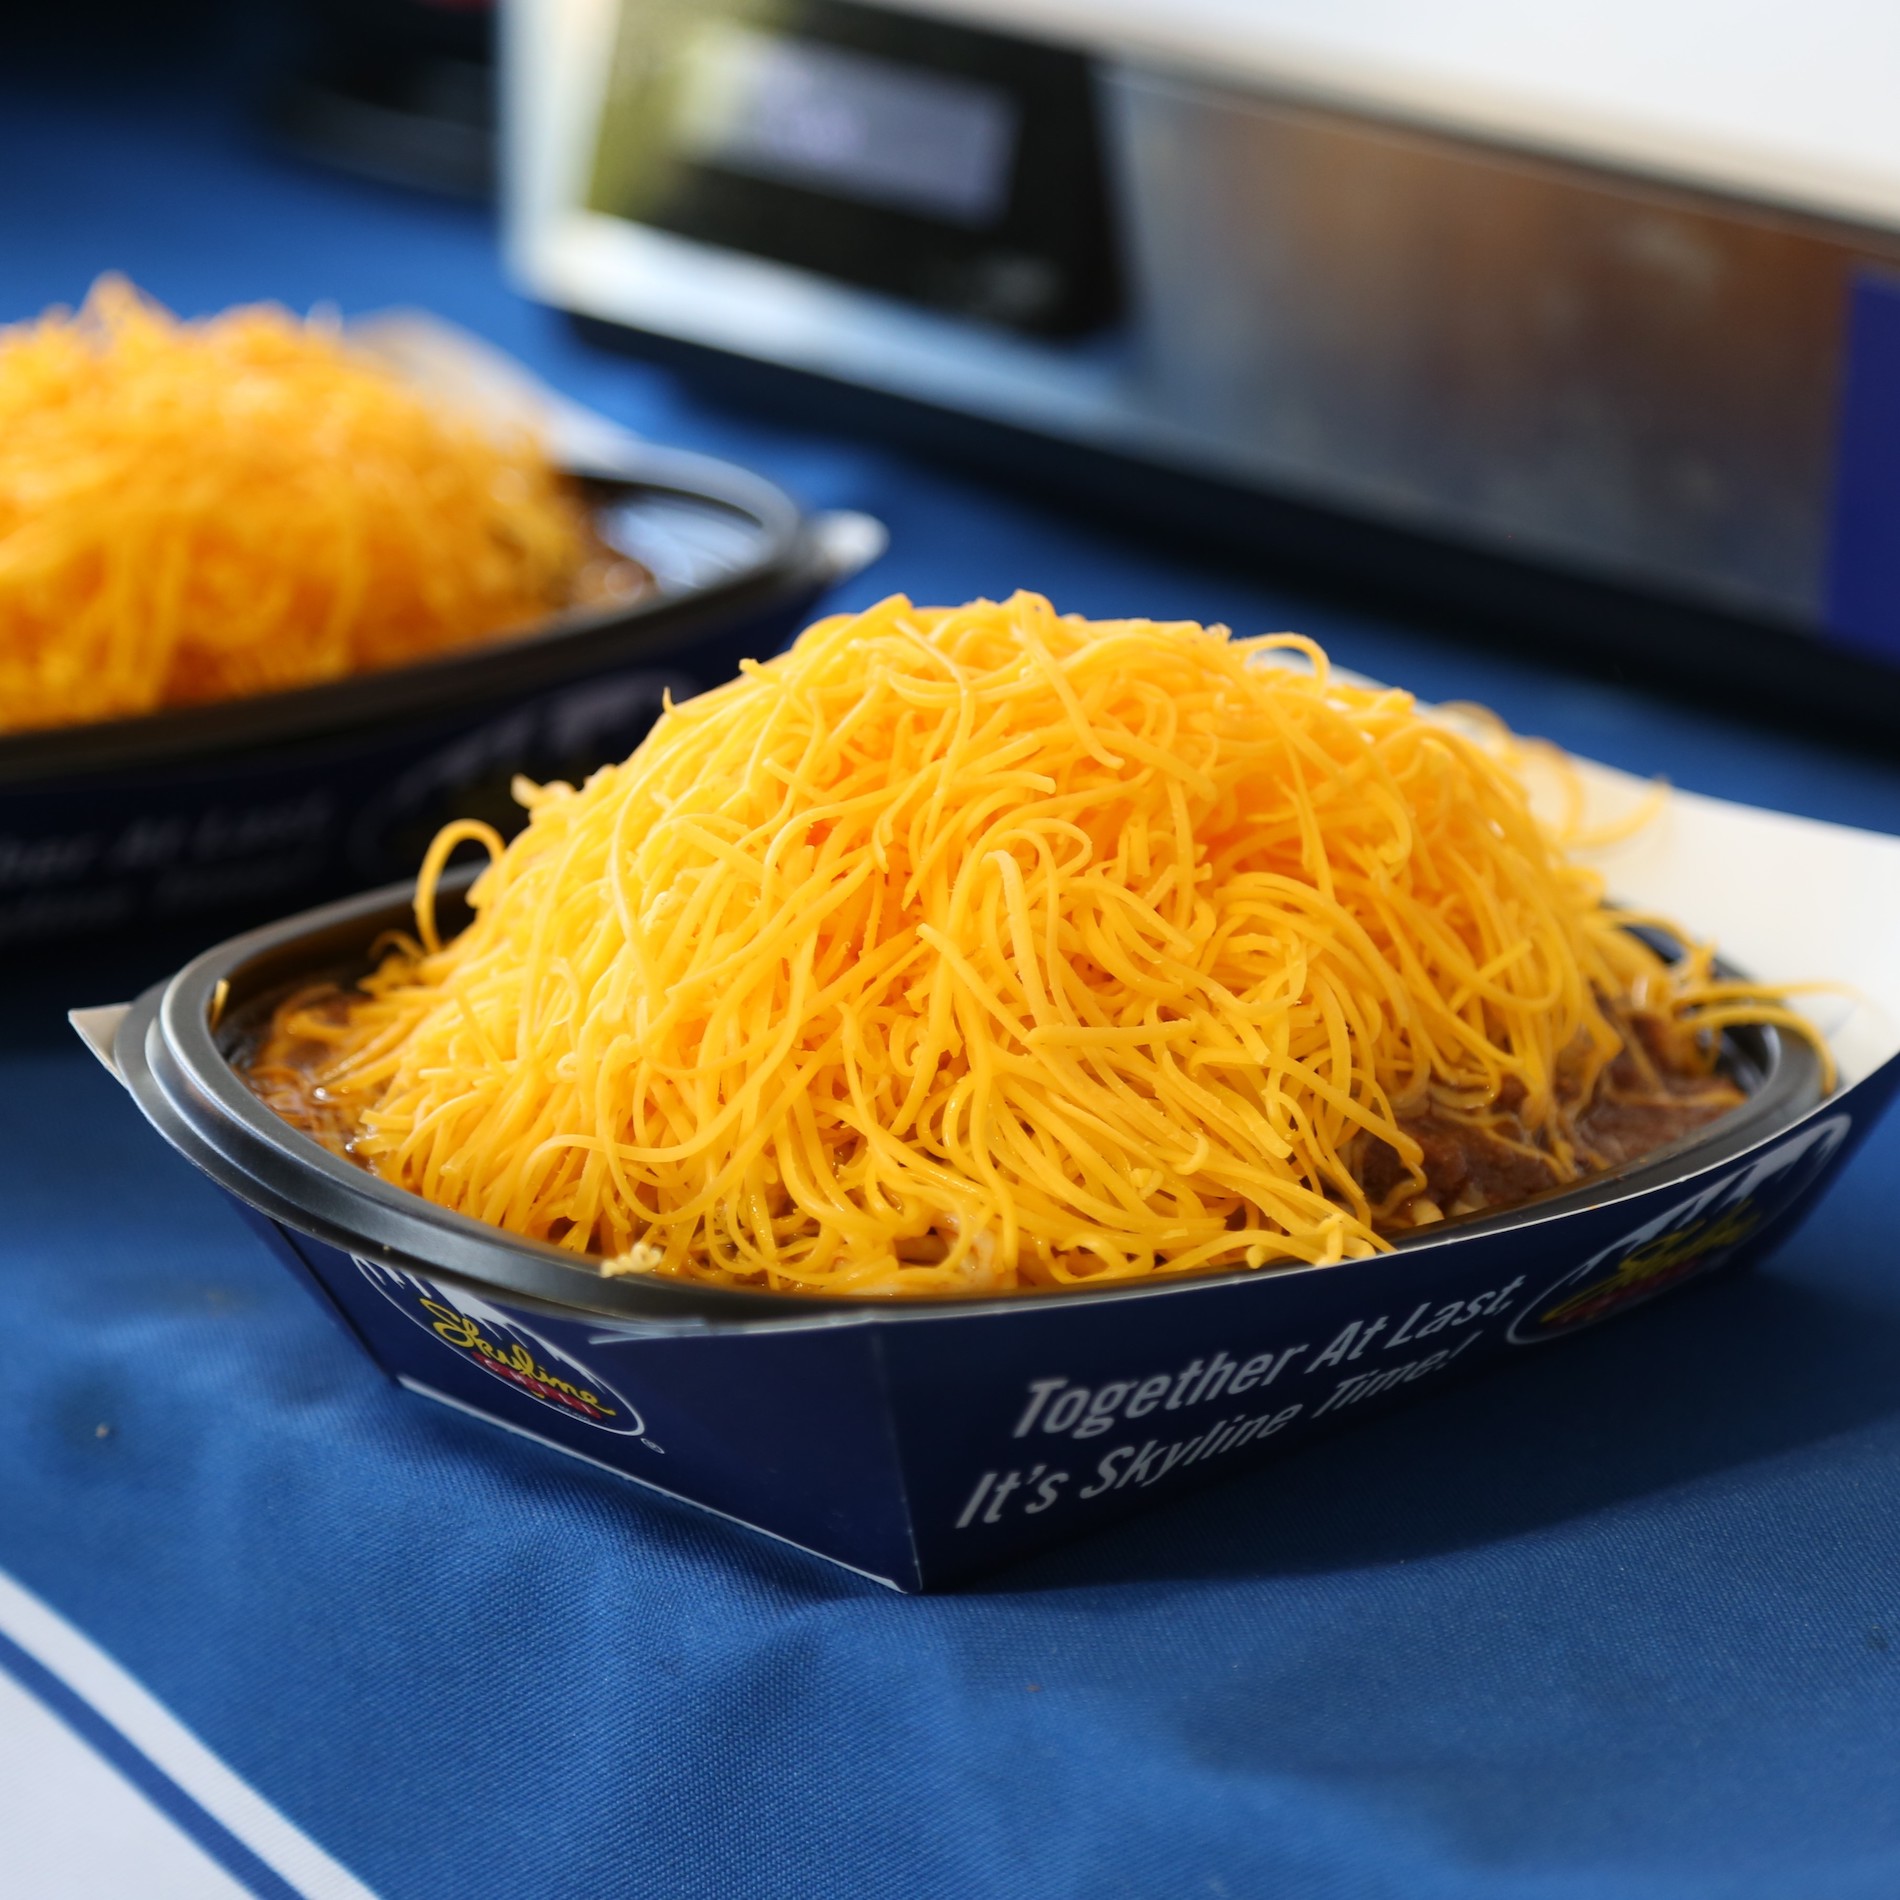 a bowl of Chili topped with cheese